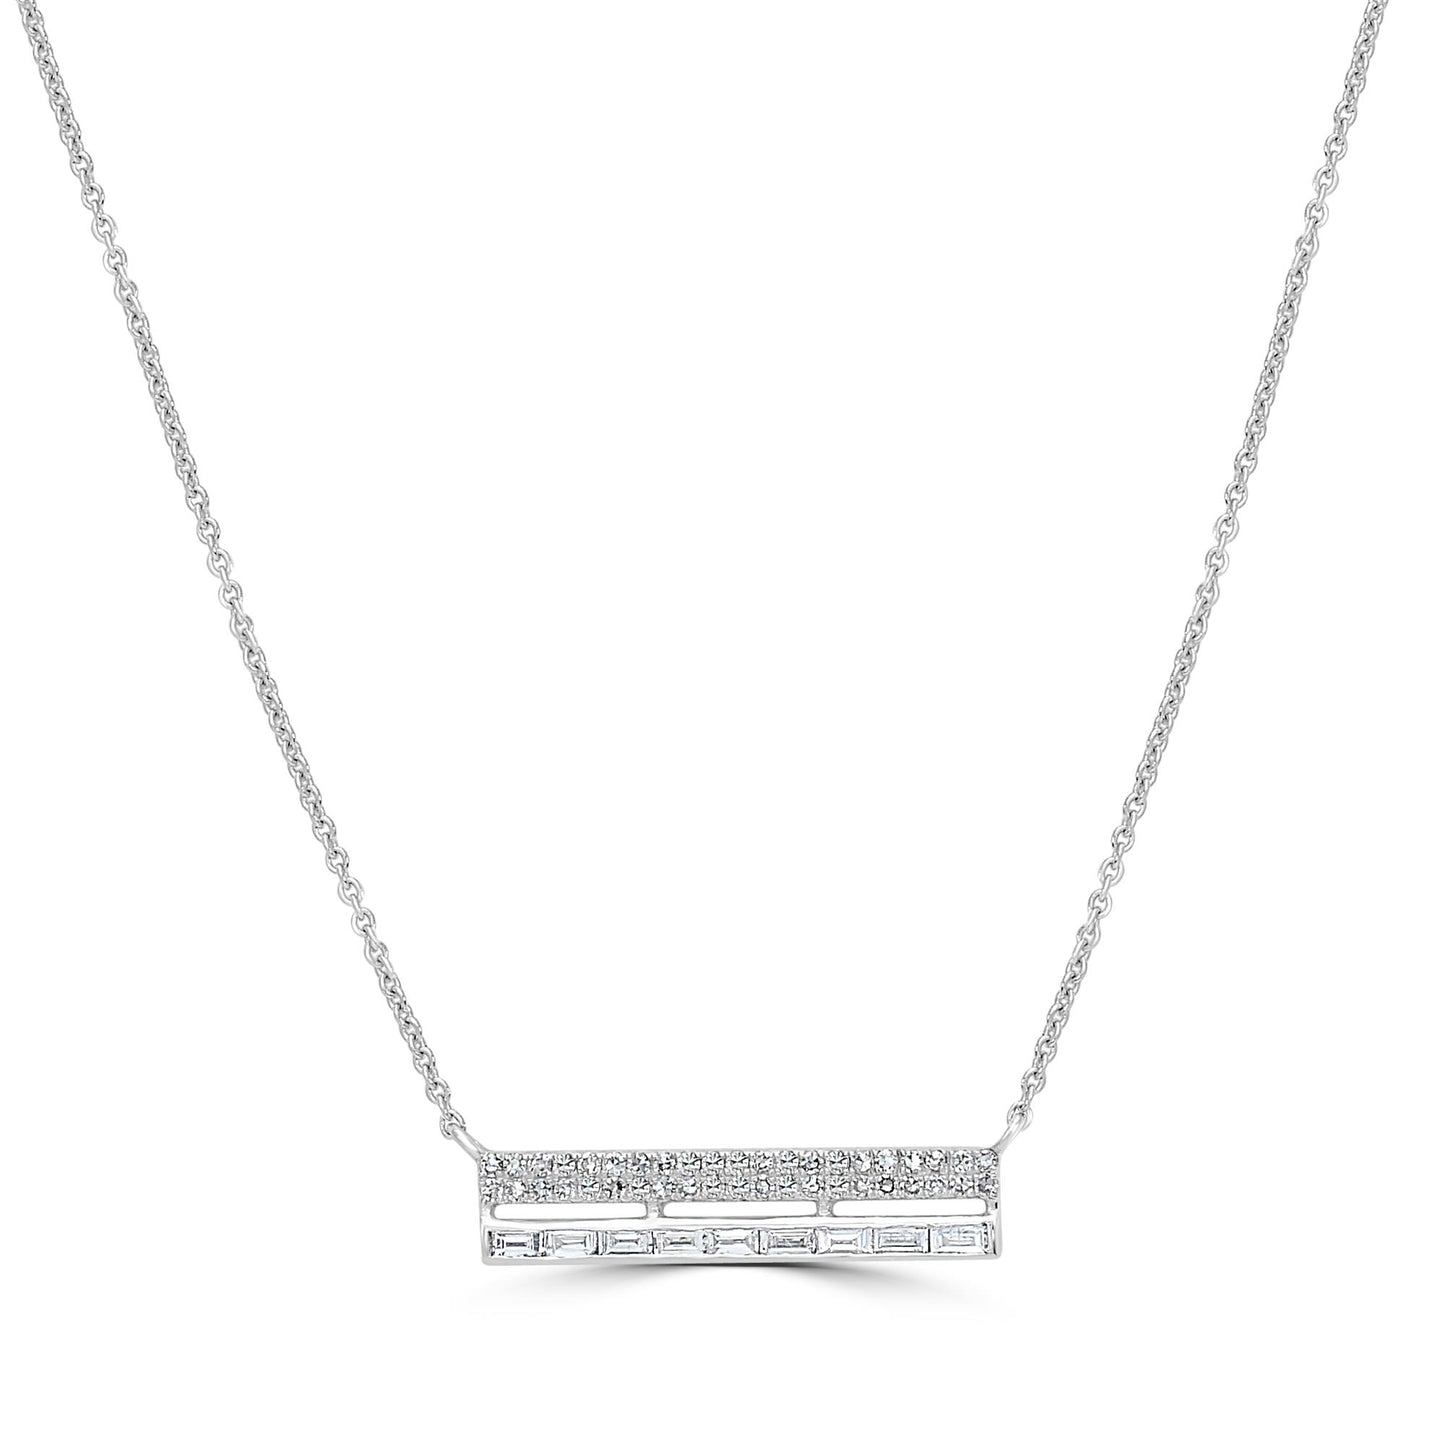 The Stanton Necklace